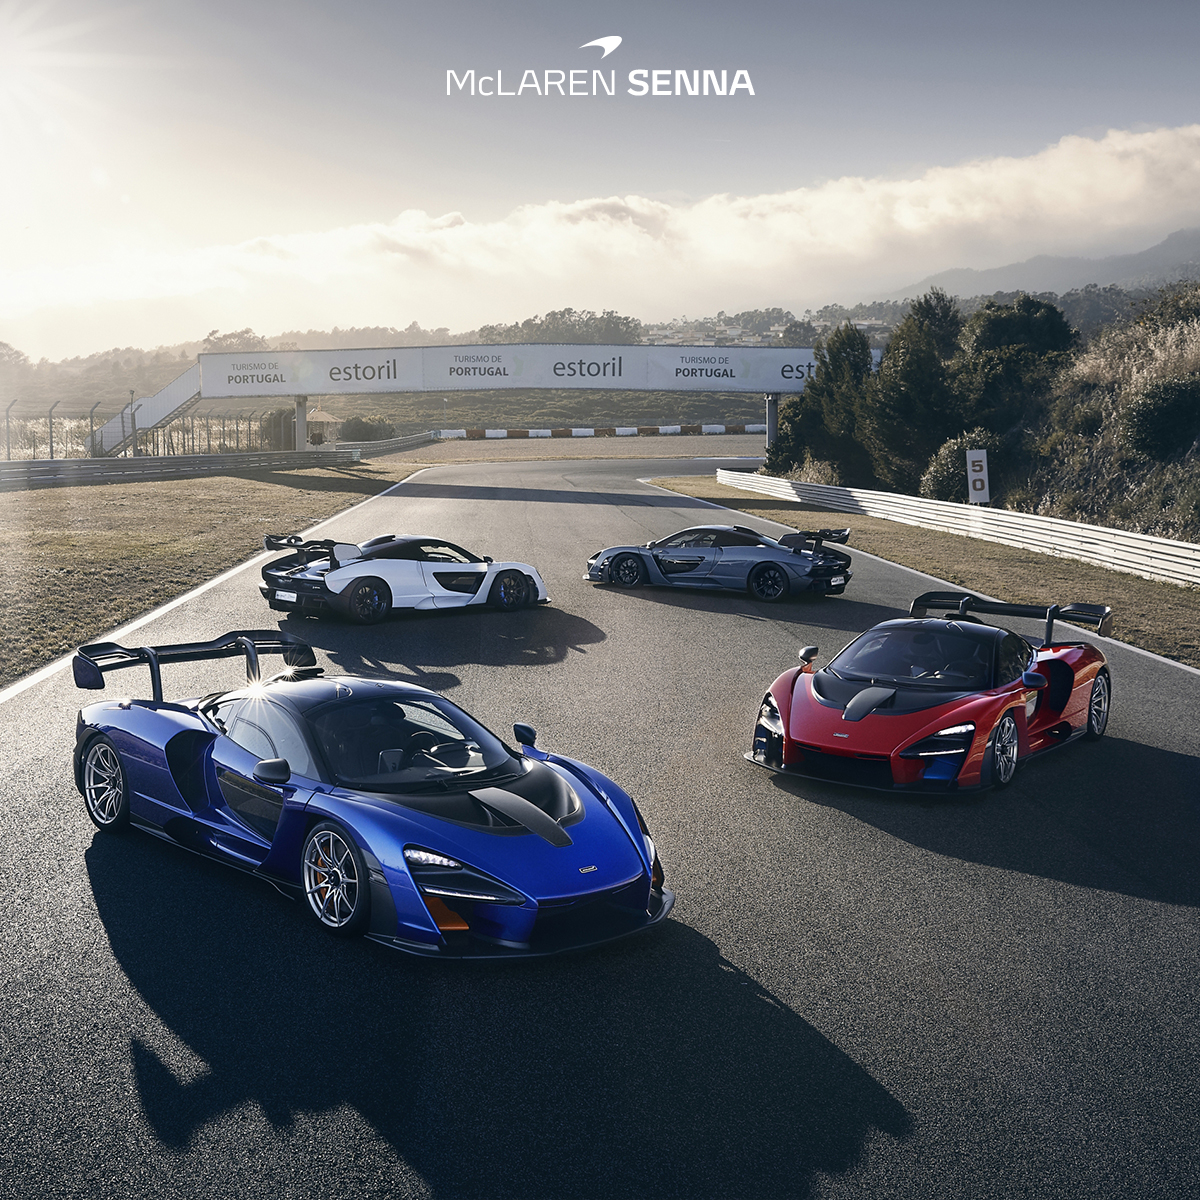 The McLaren Senna has a single-minded purpose. In the pursuit of the most rewarding and intuitive driving experience, pioneering active aerodynamics generate unprecedented levels of downforce. #Senna #McLarenBahrain #KanooMotors